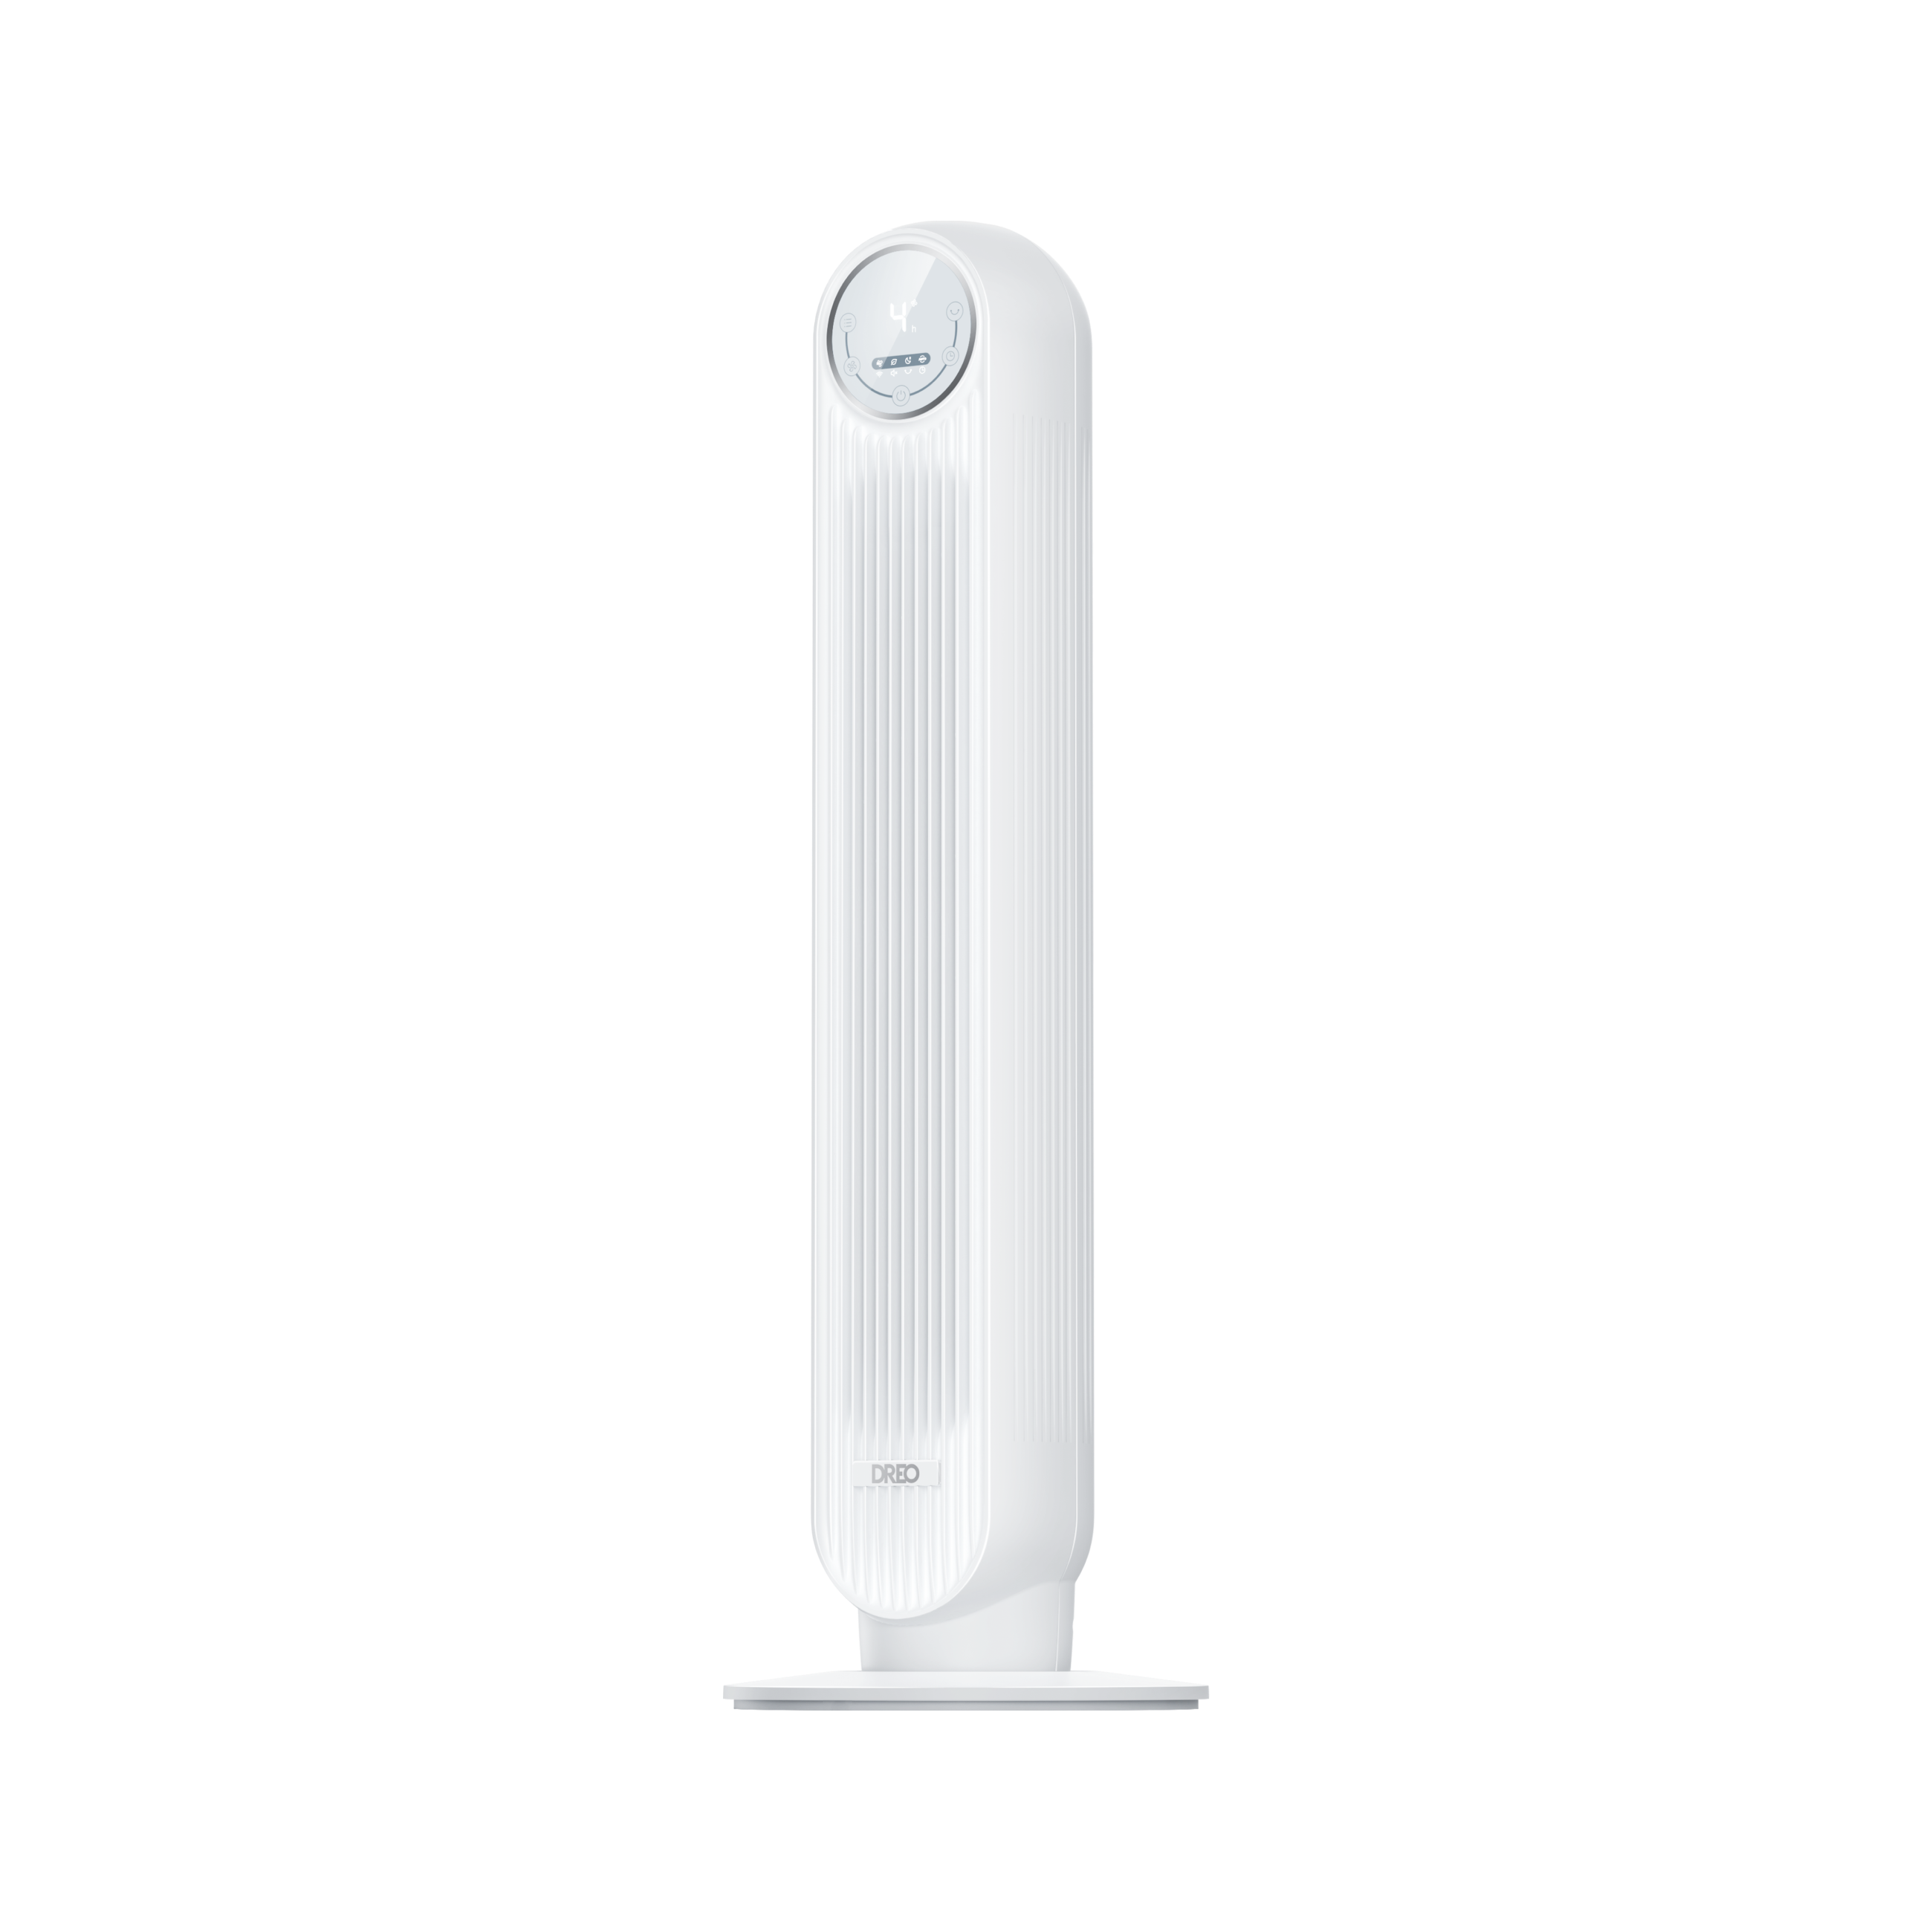 Dreo Smart Tower Fan, 36'' Quiet Cooling Fan, Voice Control Works with Alexa & Google, Oscillating Fan with 4 Speeds, 4 Modes, 8H Timer, Bladeless Fan, Portable Floor Fans, White